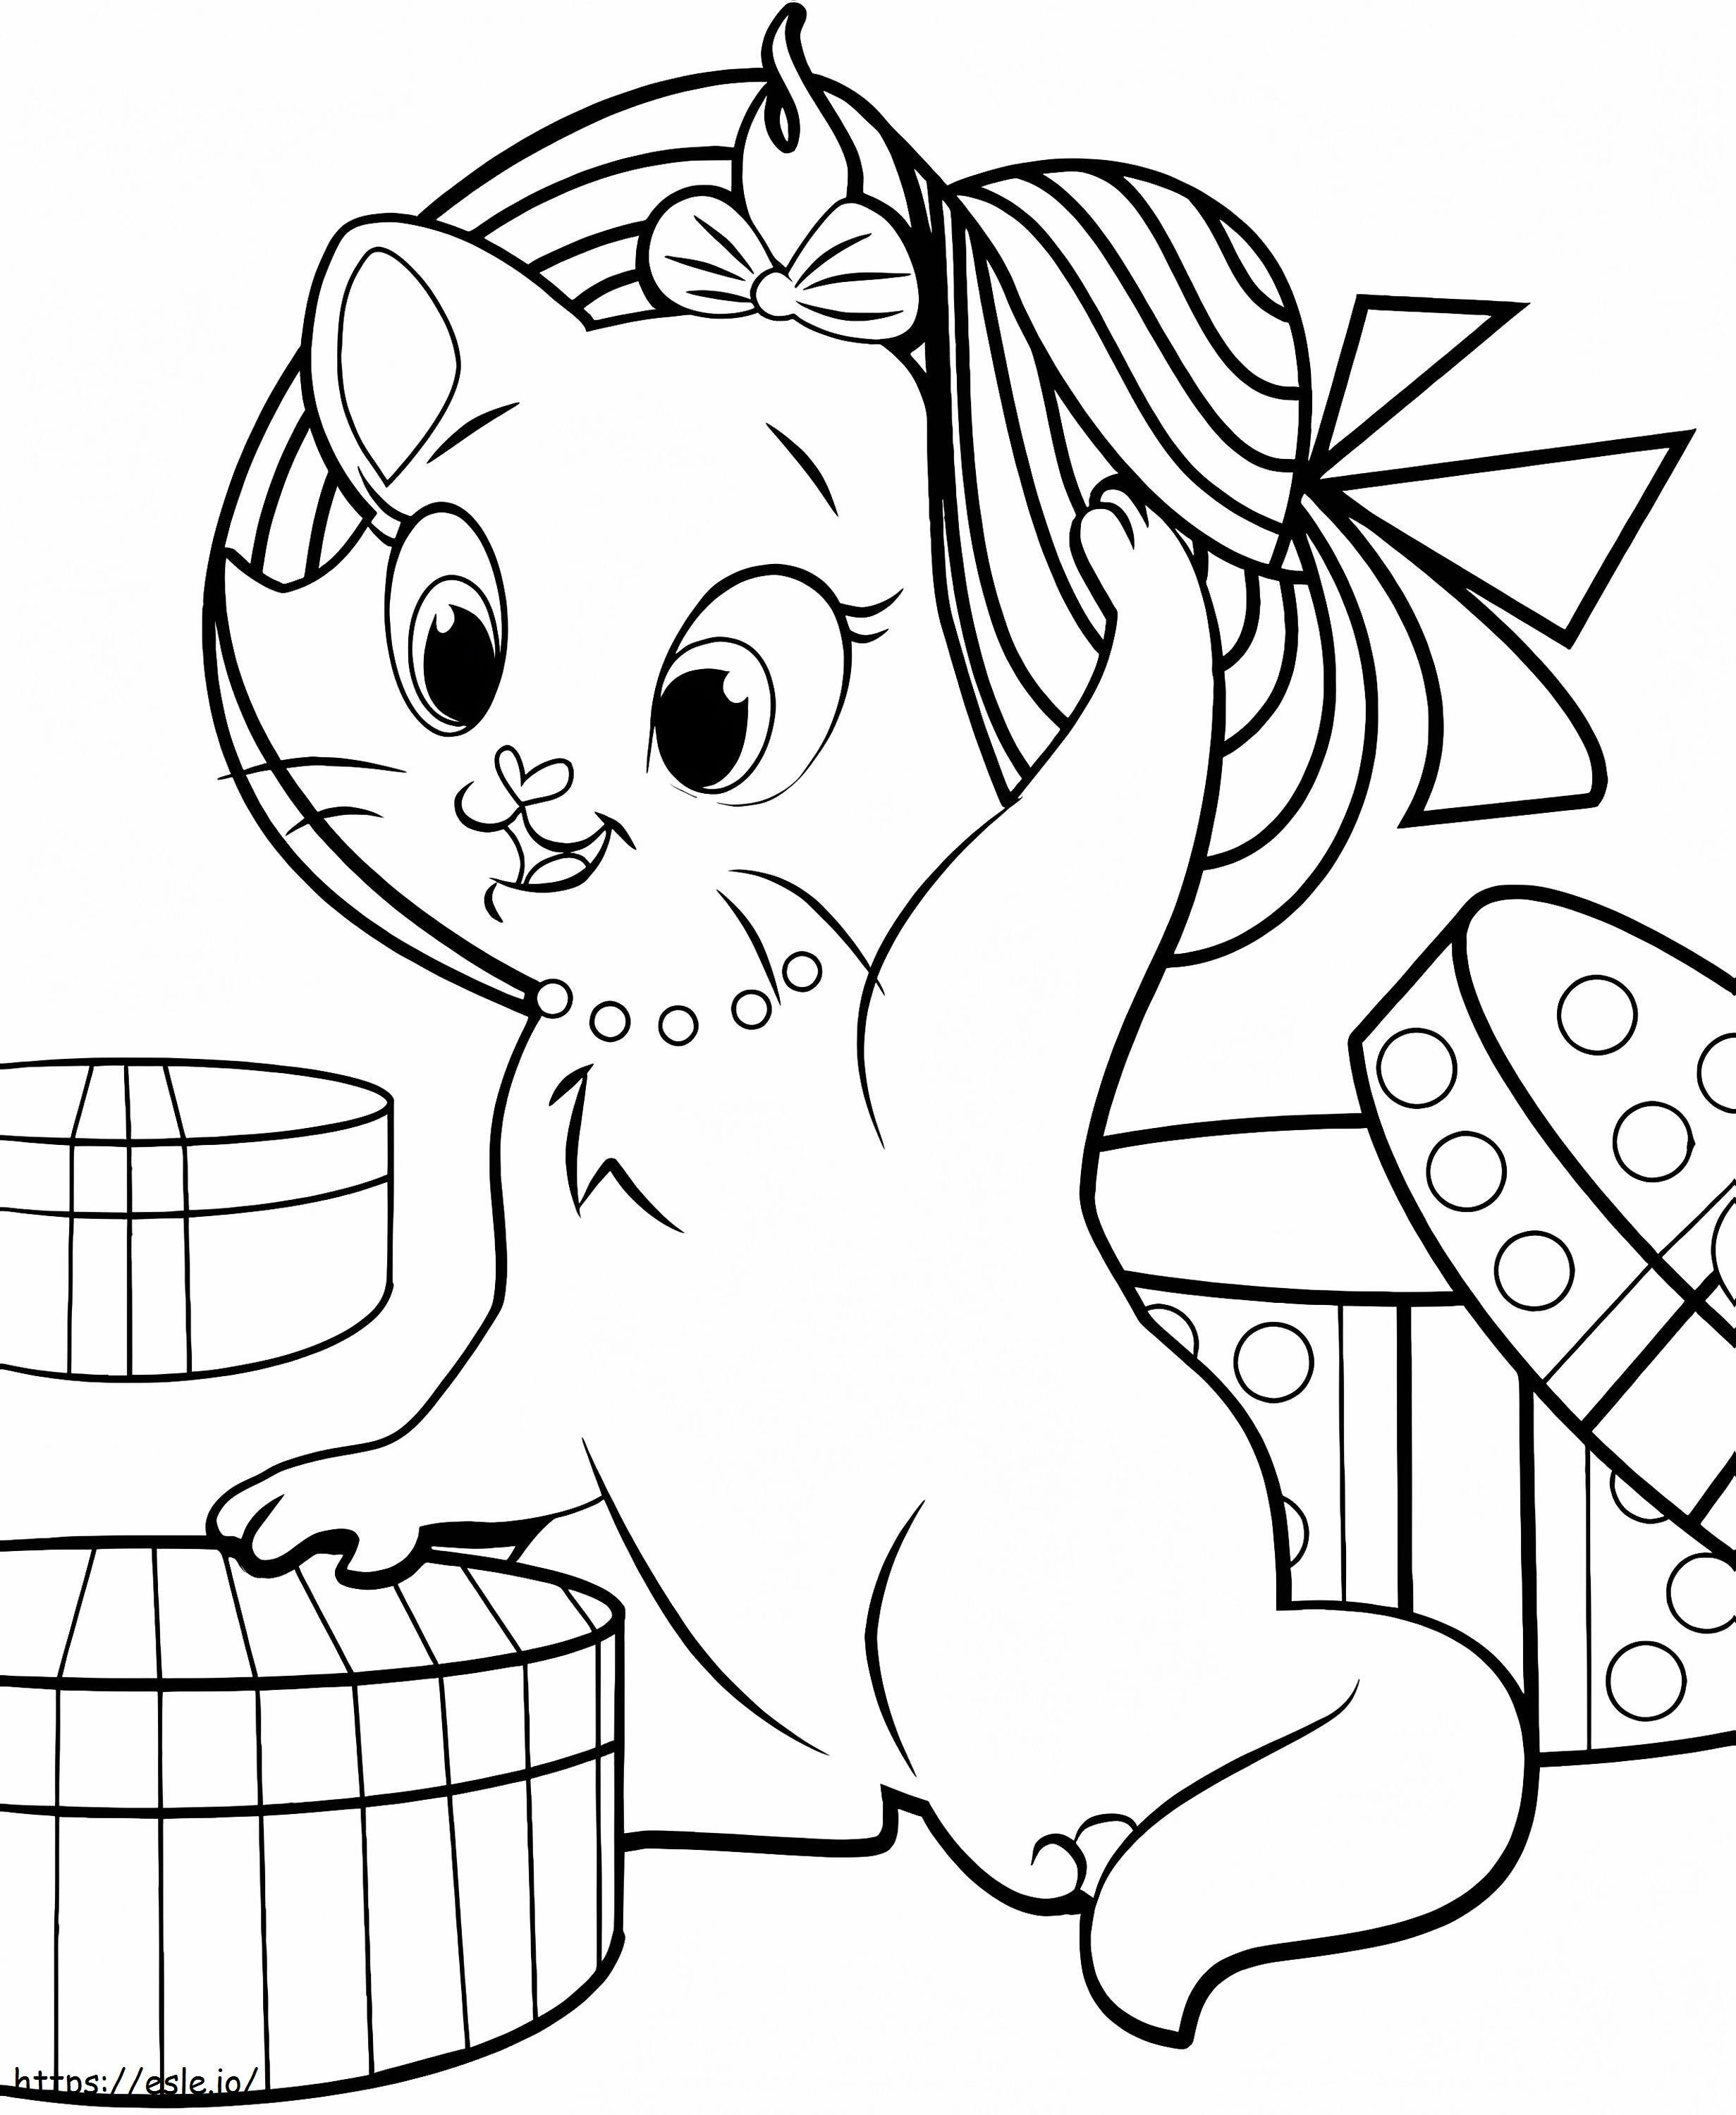 Cute Marie Cat coloring page